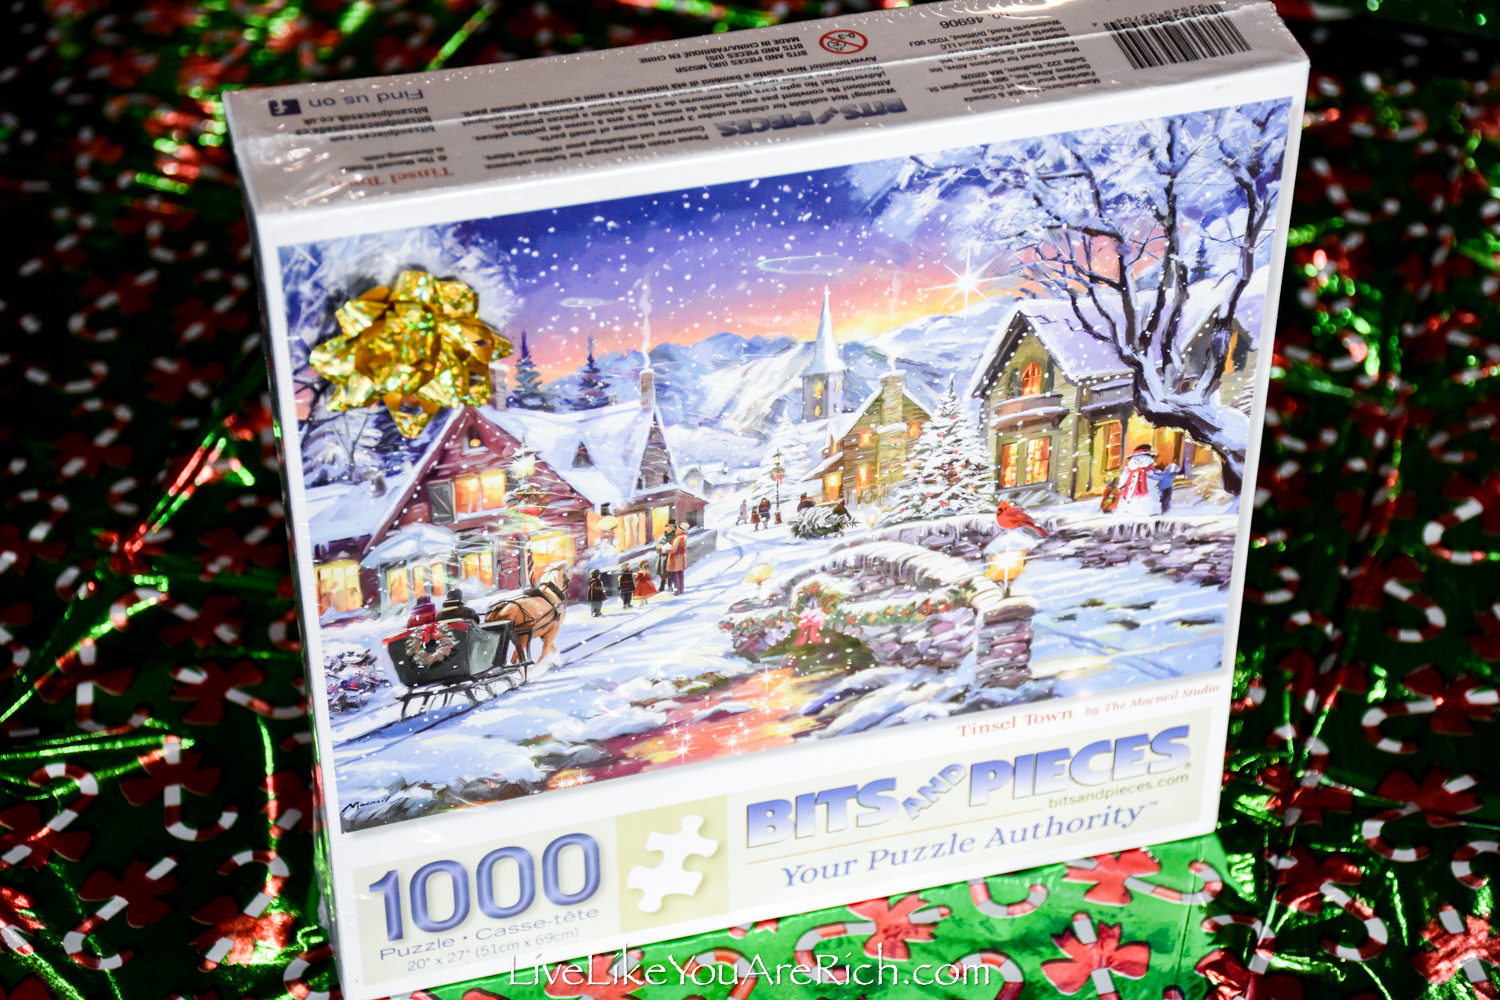 Neighbor Christmas Gift: A Puzzle